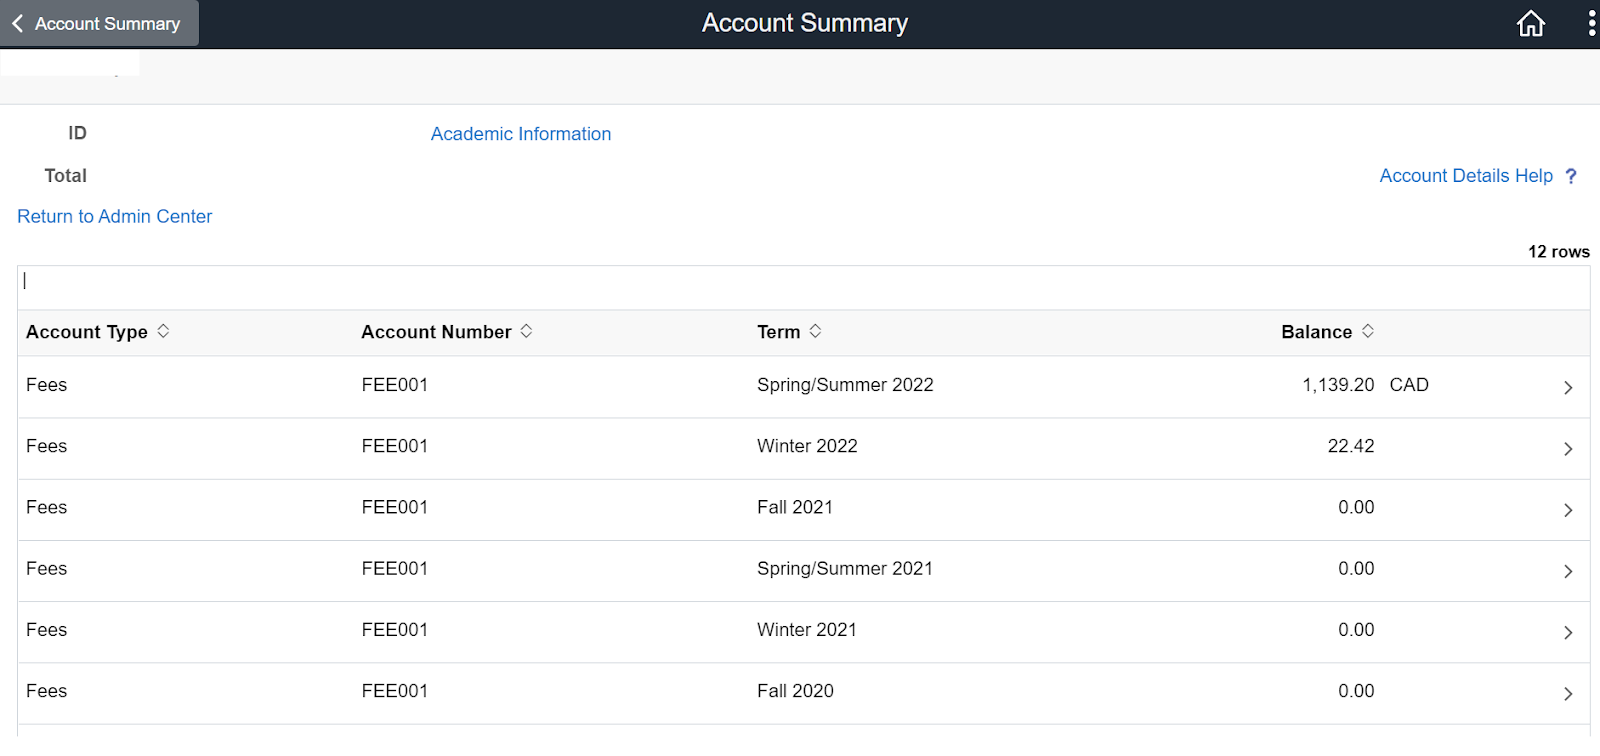 A breakdown of fees as displayed on the Account Summary page